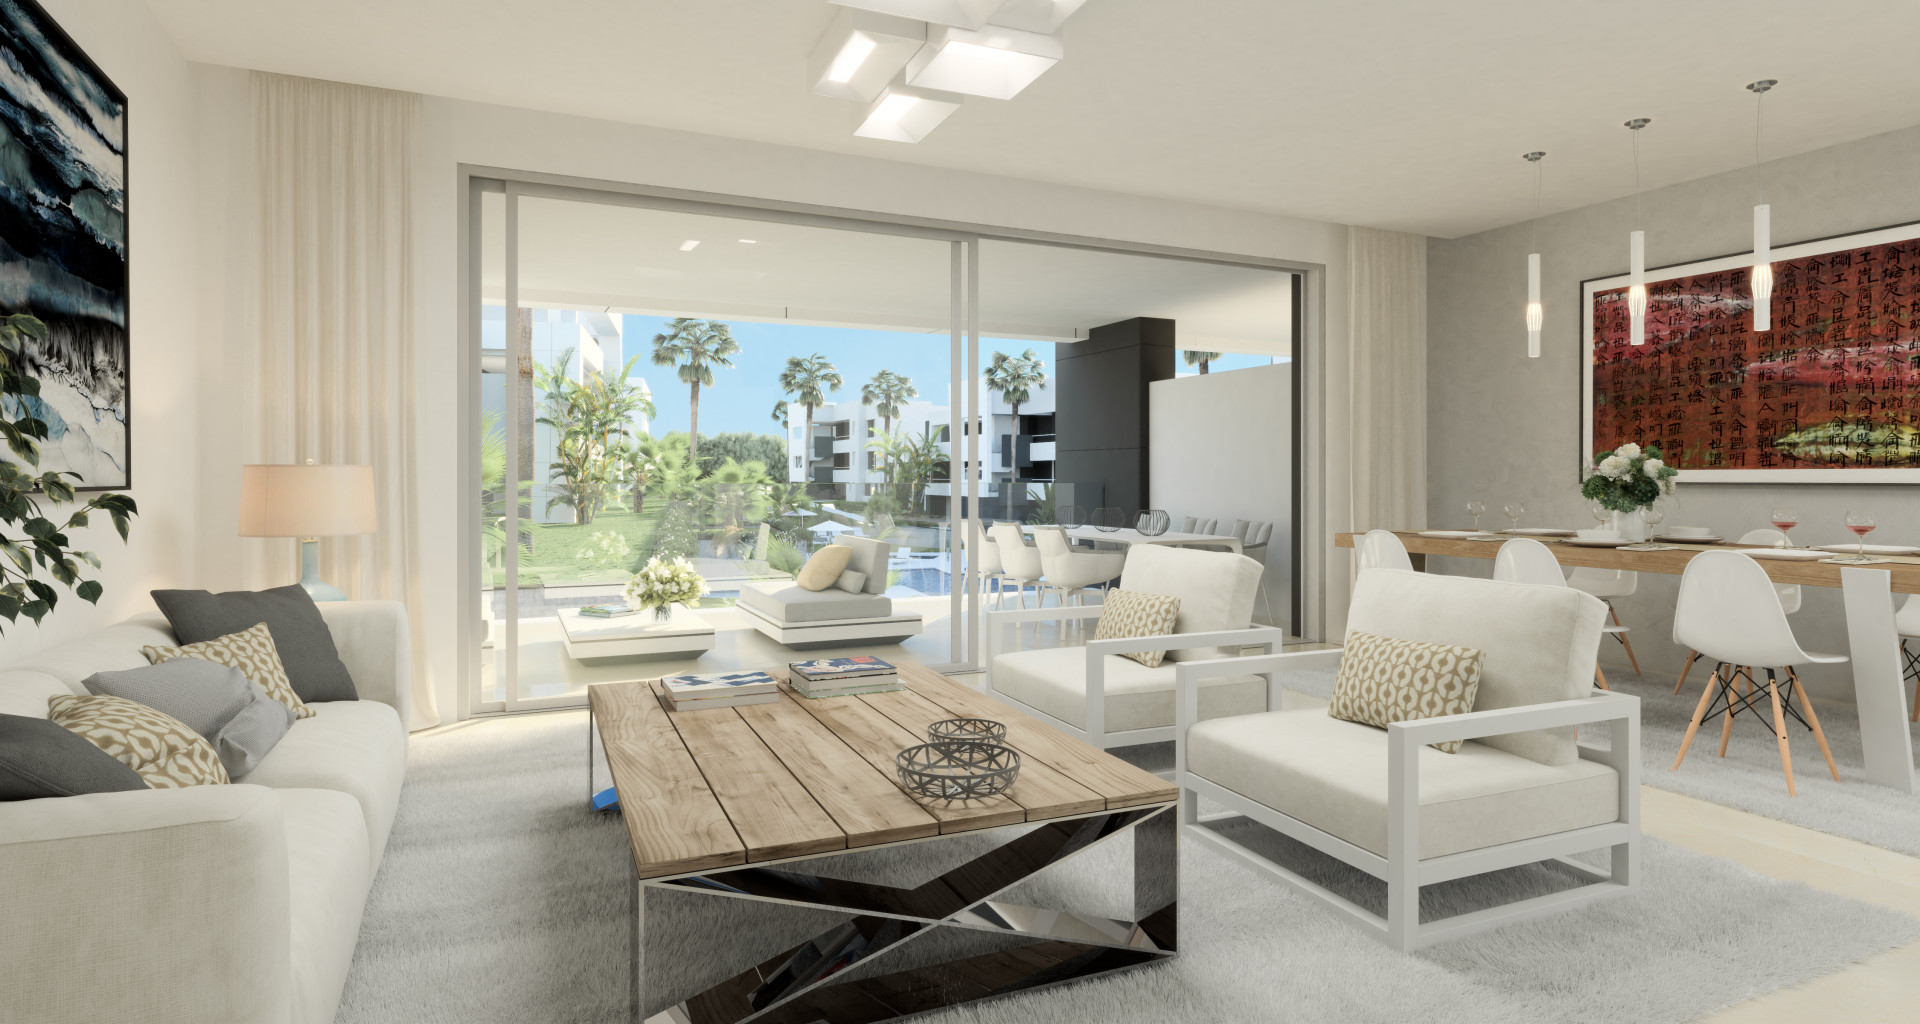 New modern apartments for sale on the New Golden Mile Estepona